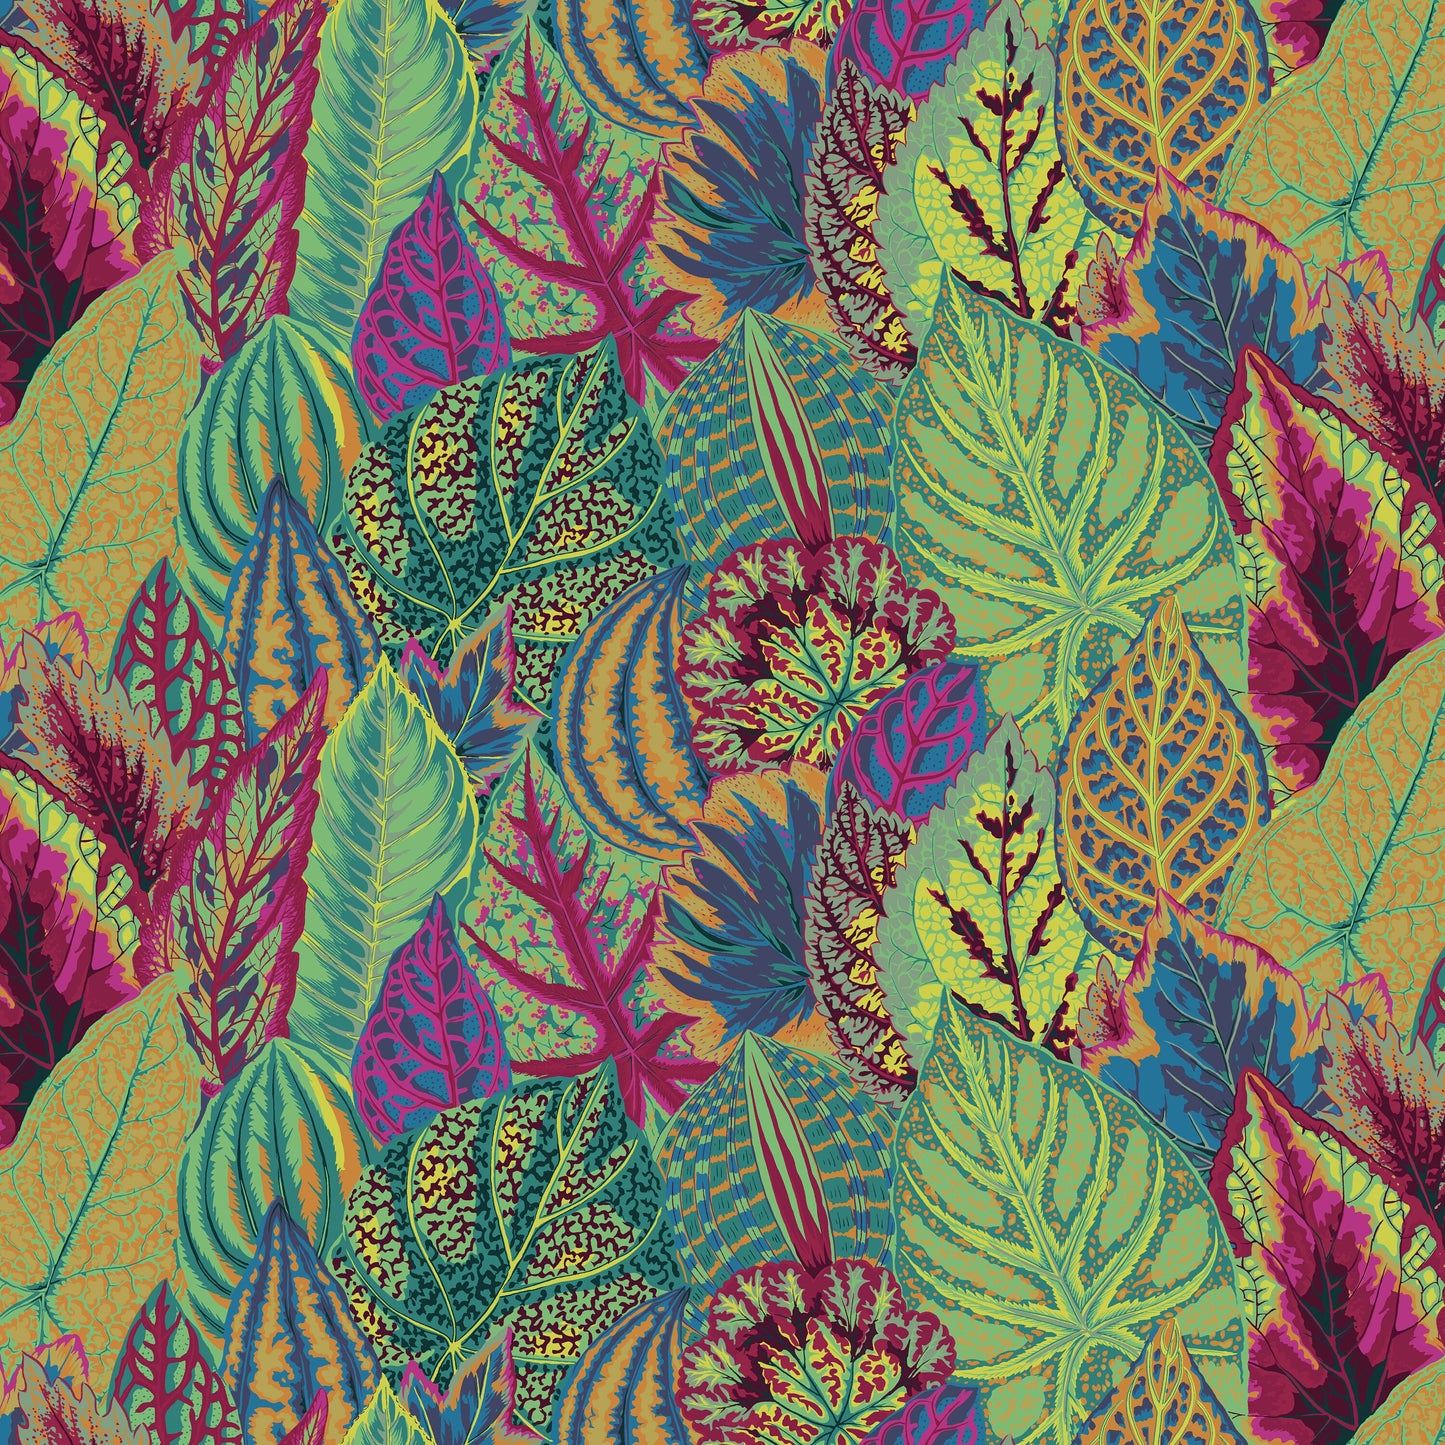 Kaffe Coleus Moss PWPJ030, Kaffe Fassett Fabric, Philip Jacobs, Quilt Fabric, Quilting Fabric, Collage Fabric, Cotton Fabric By The Yard